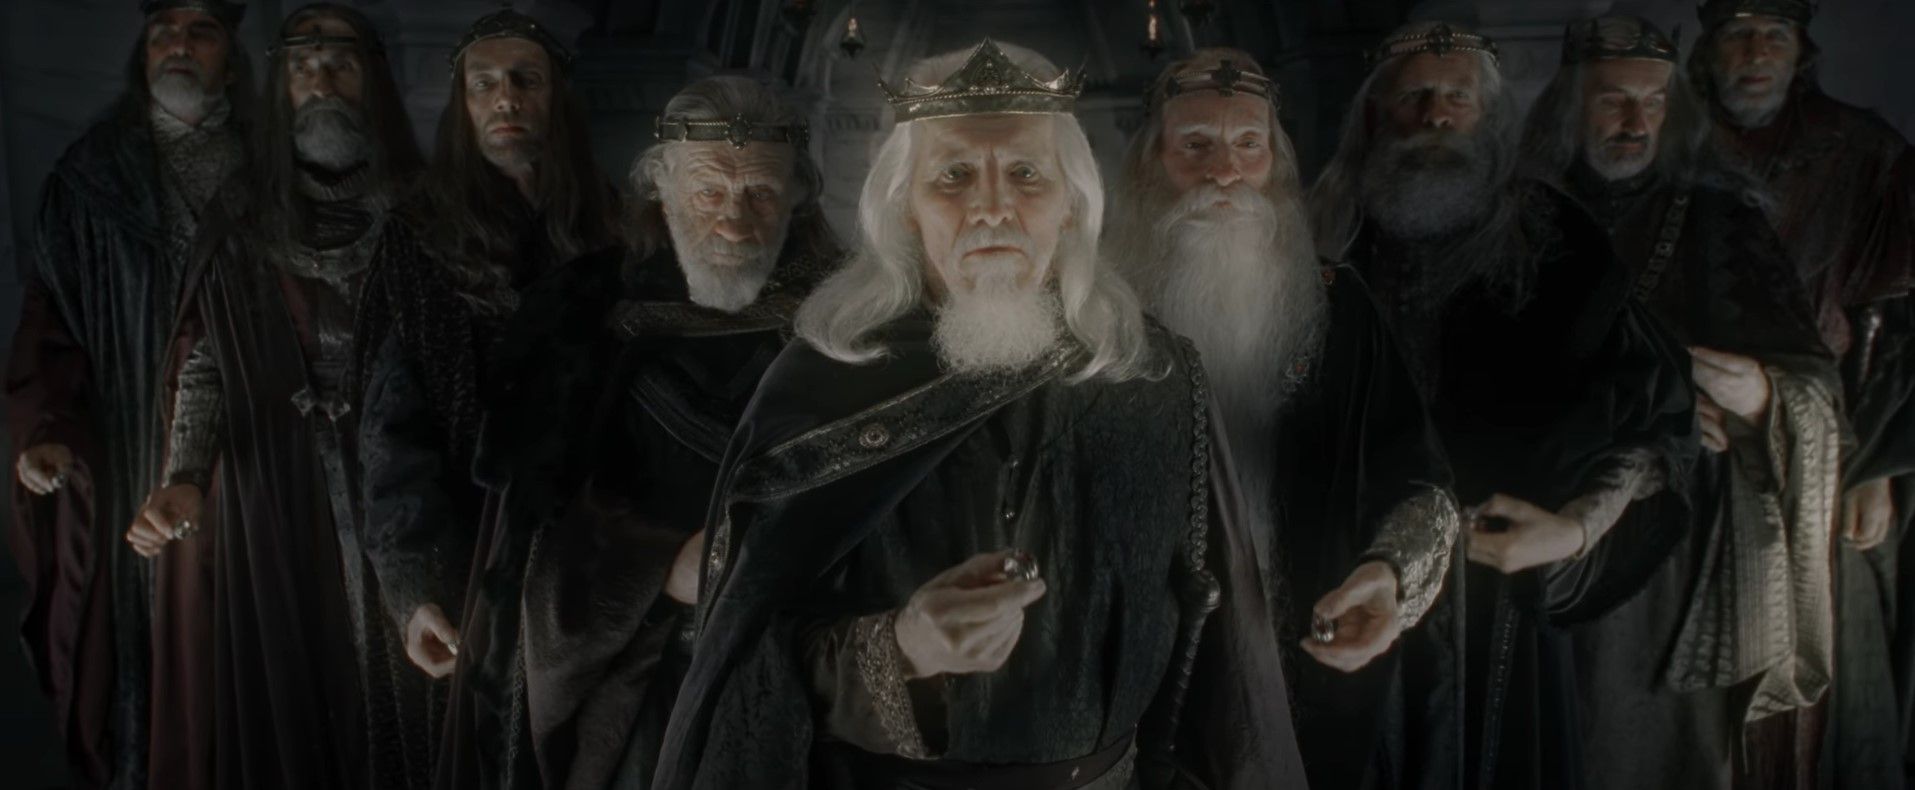 Lord of the Rings' Series 'Rings of Power': Trailer, Release Date,  Cast